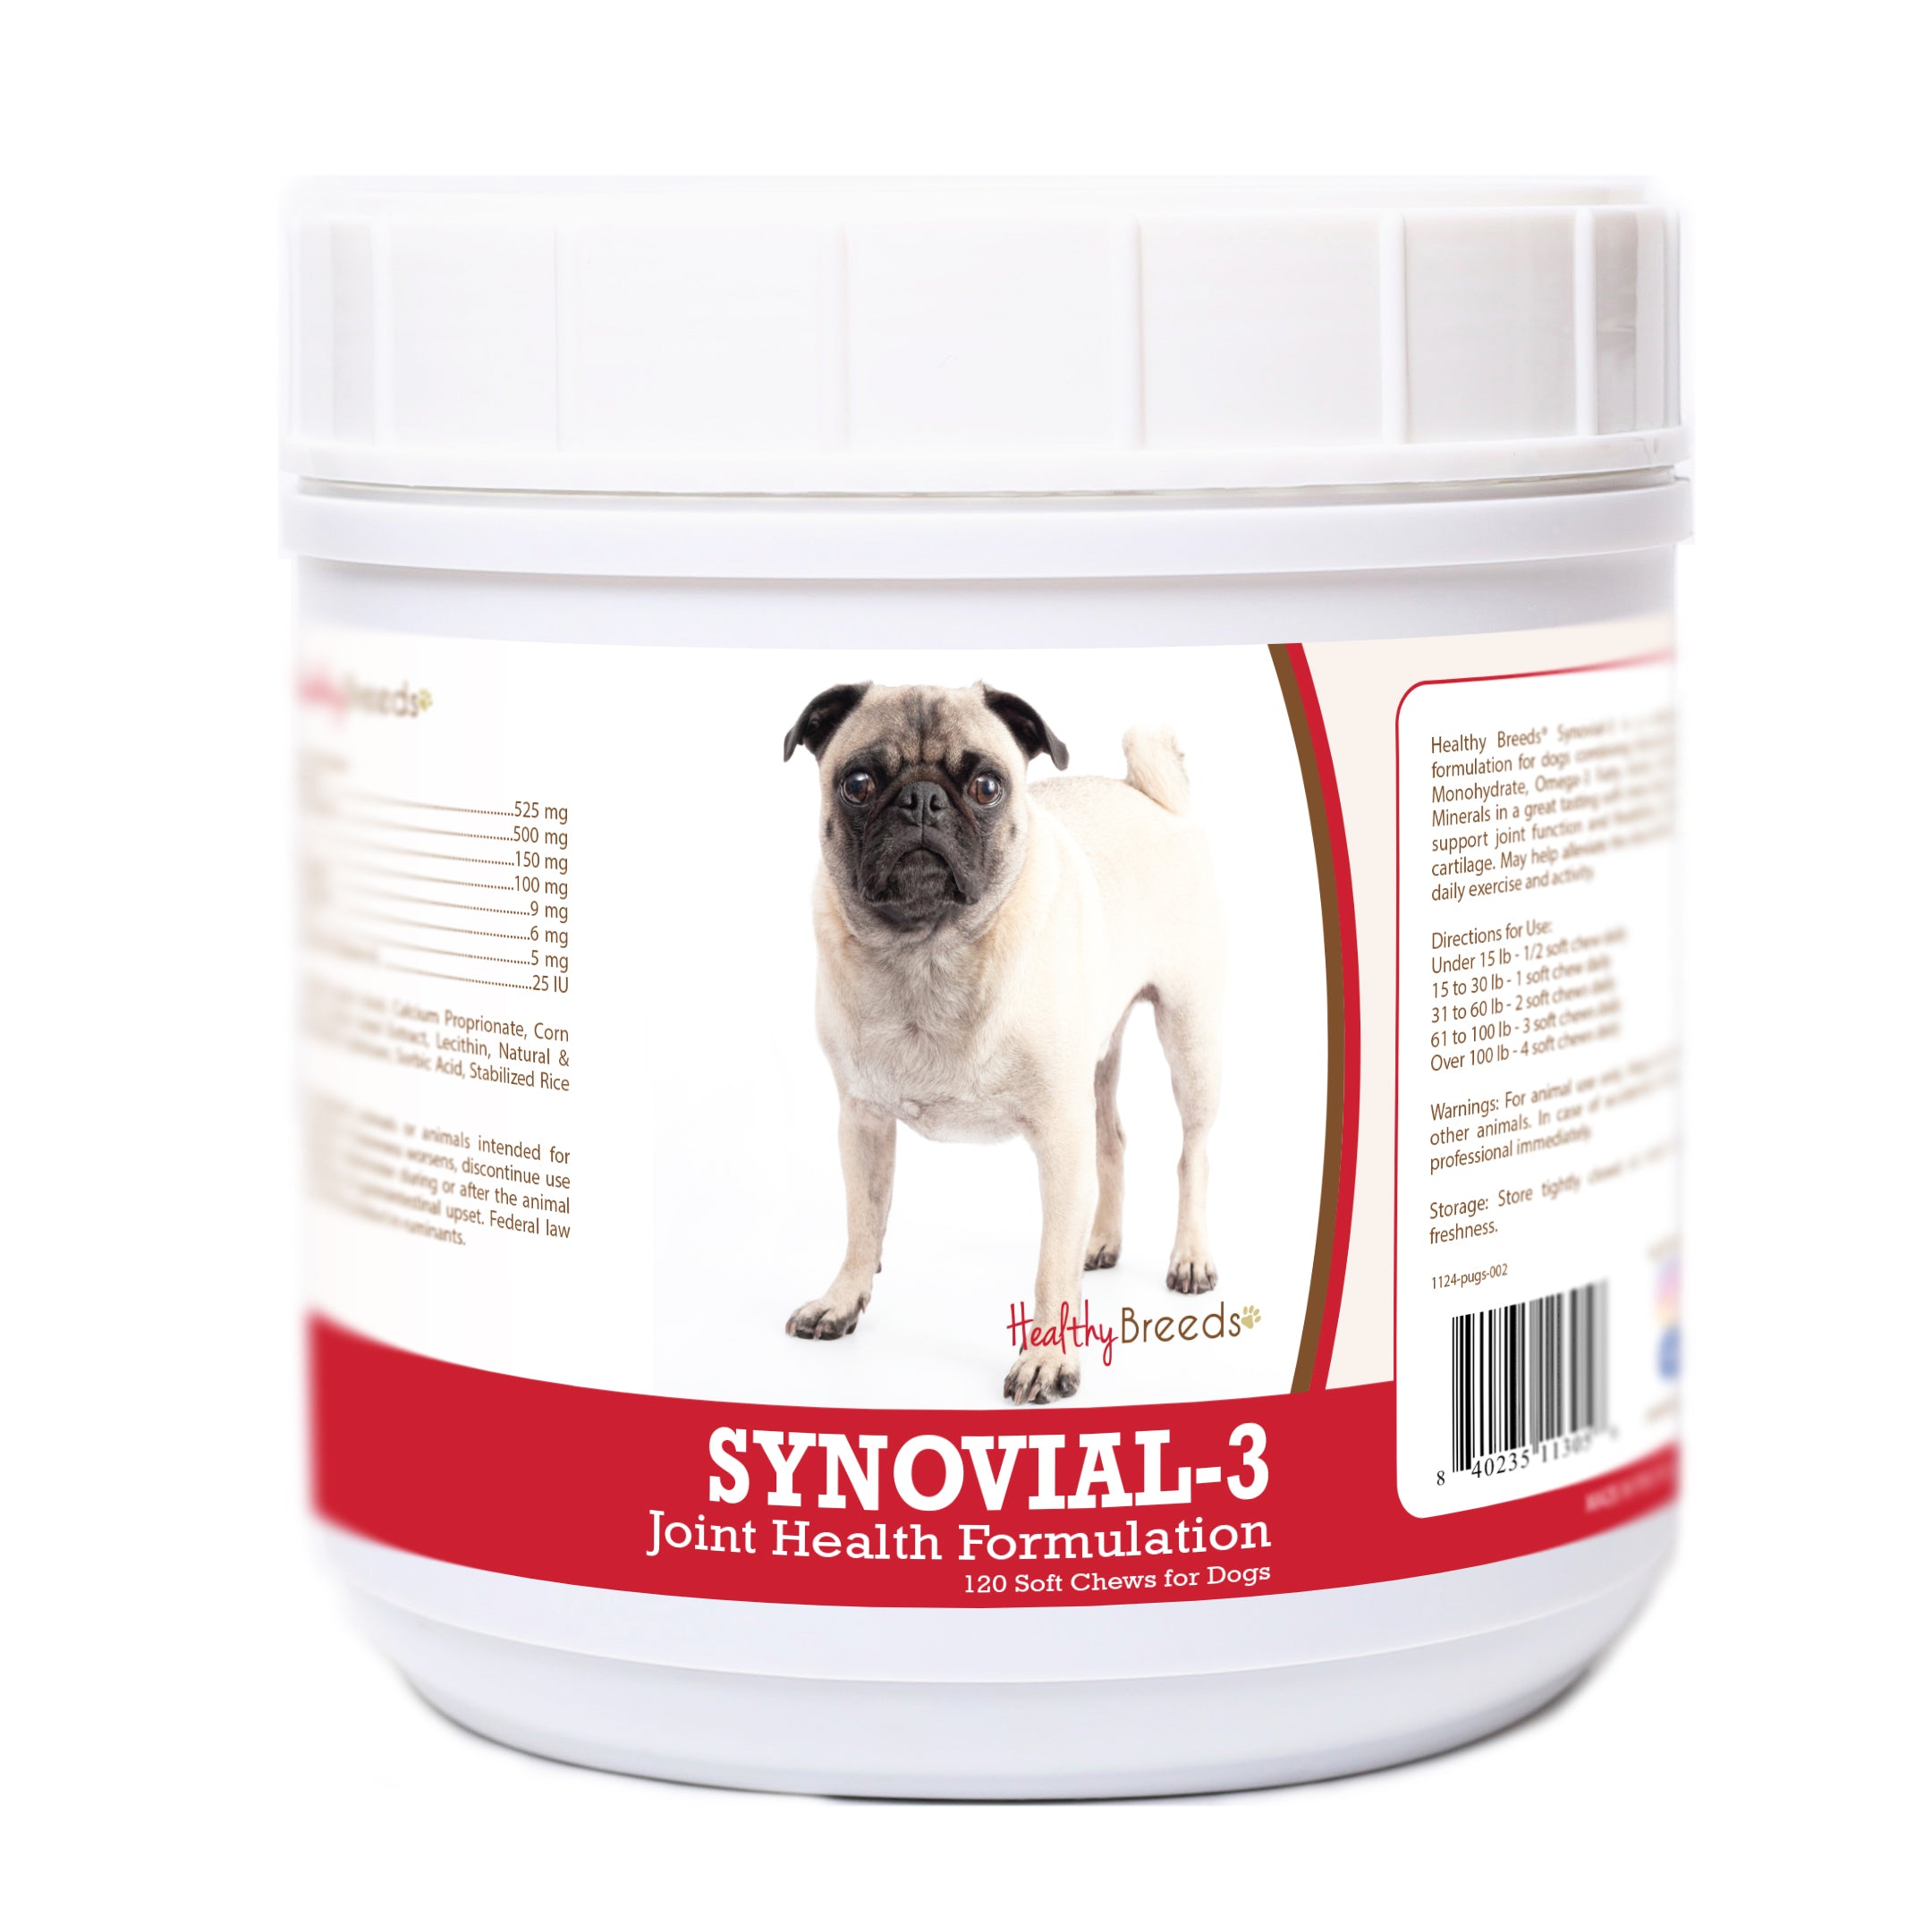 Pug Synovial-3 Joint Health Formulation Soft Chews 120 Count